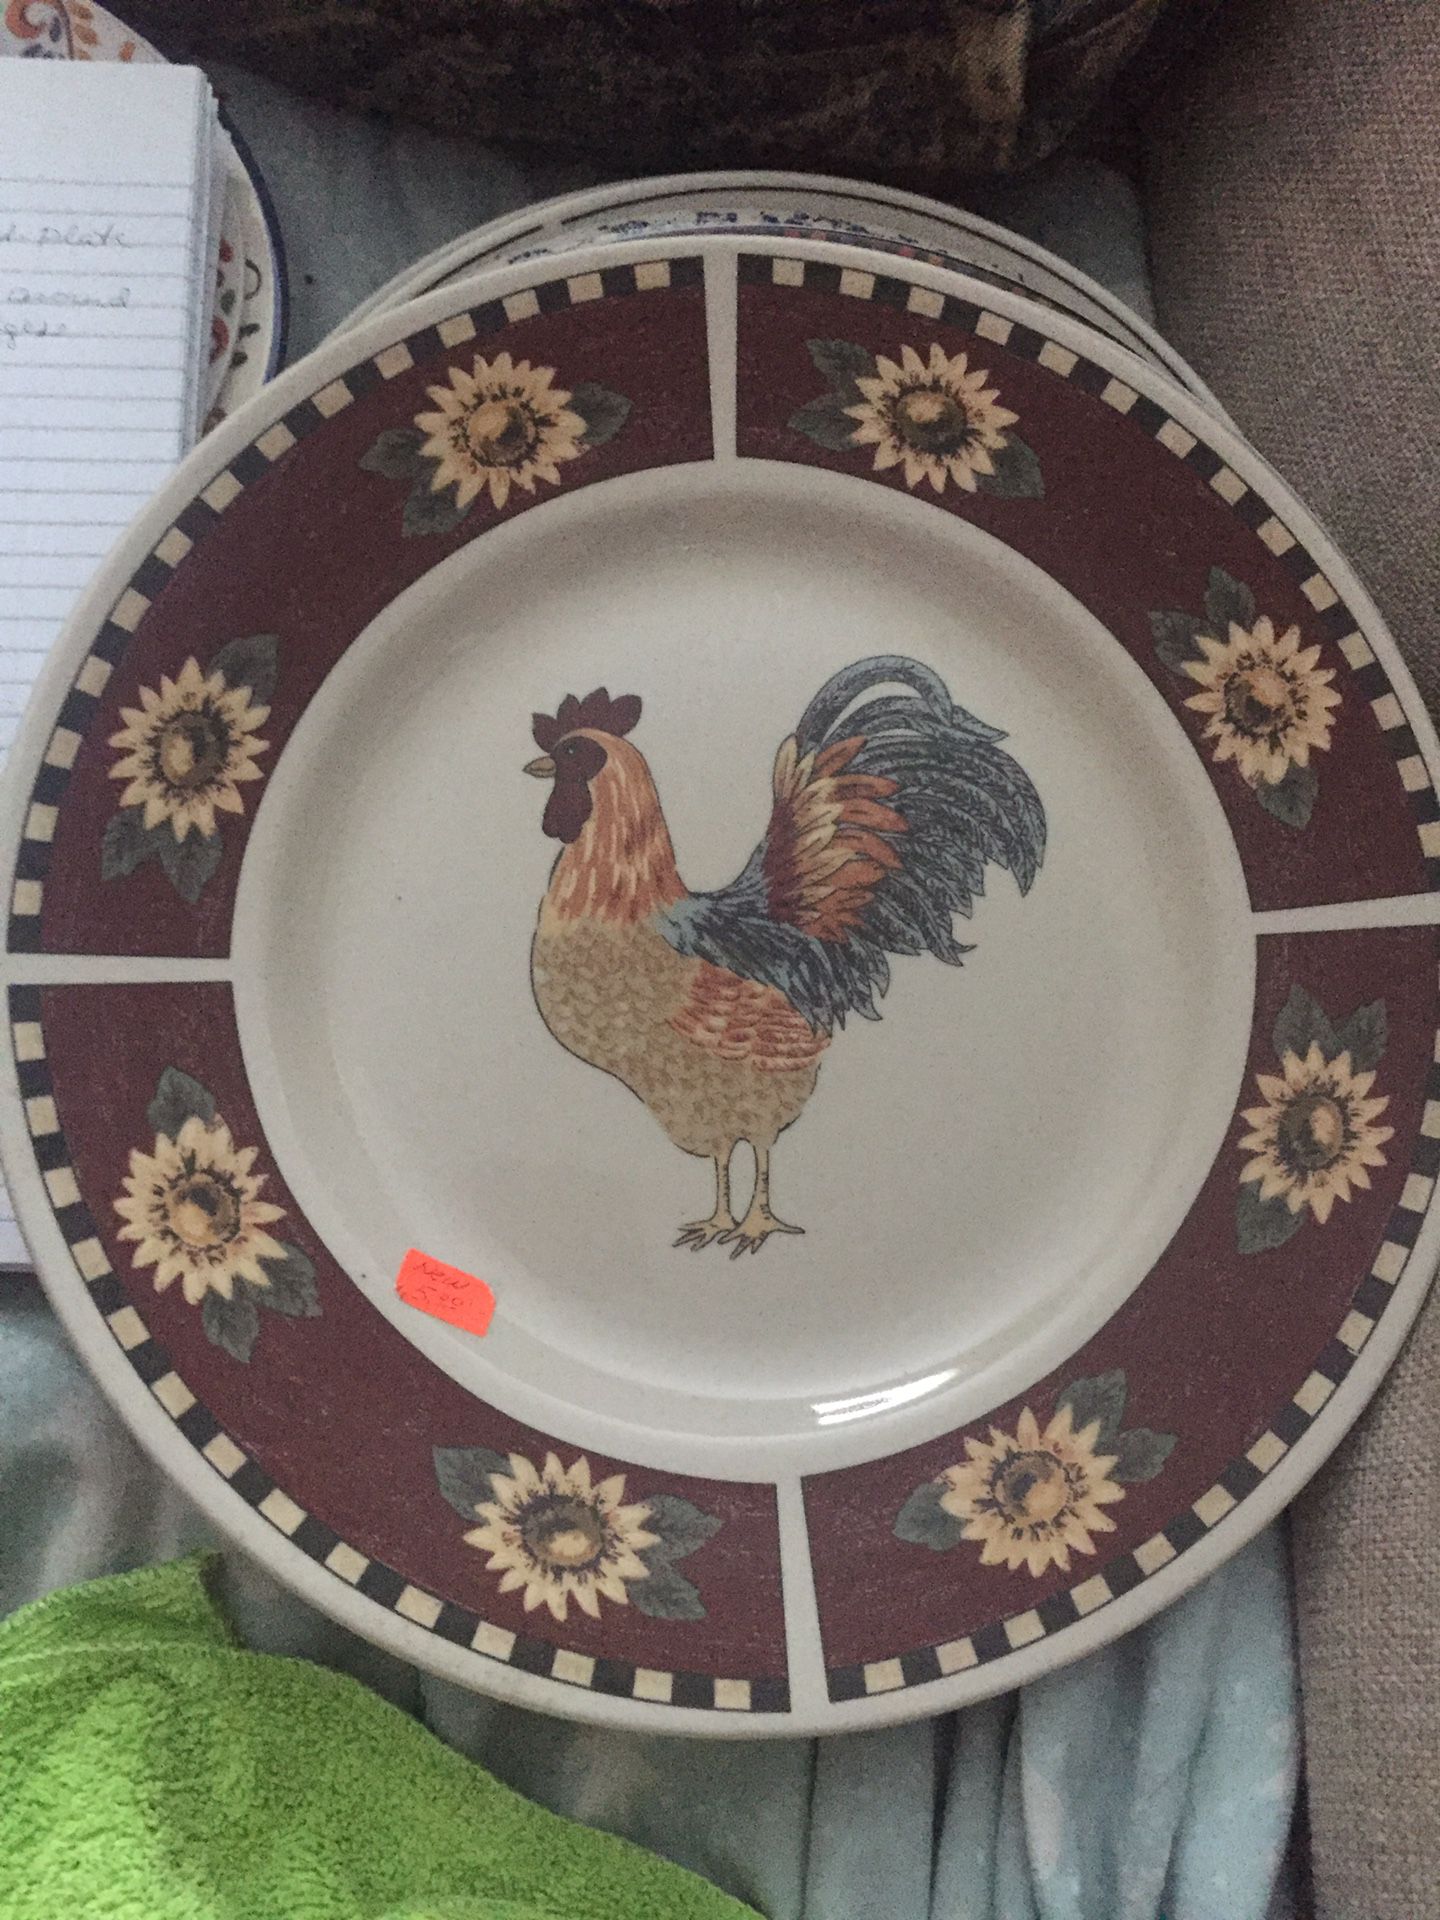 Decorative 10” Rooster Plate